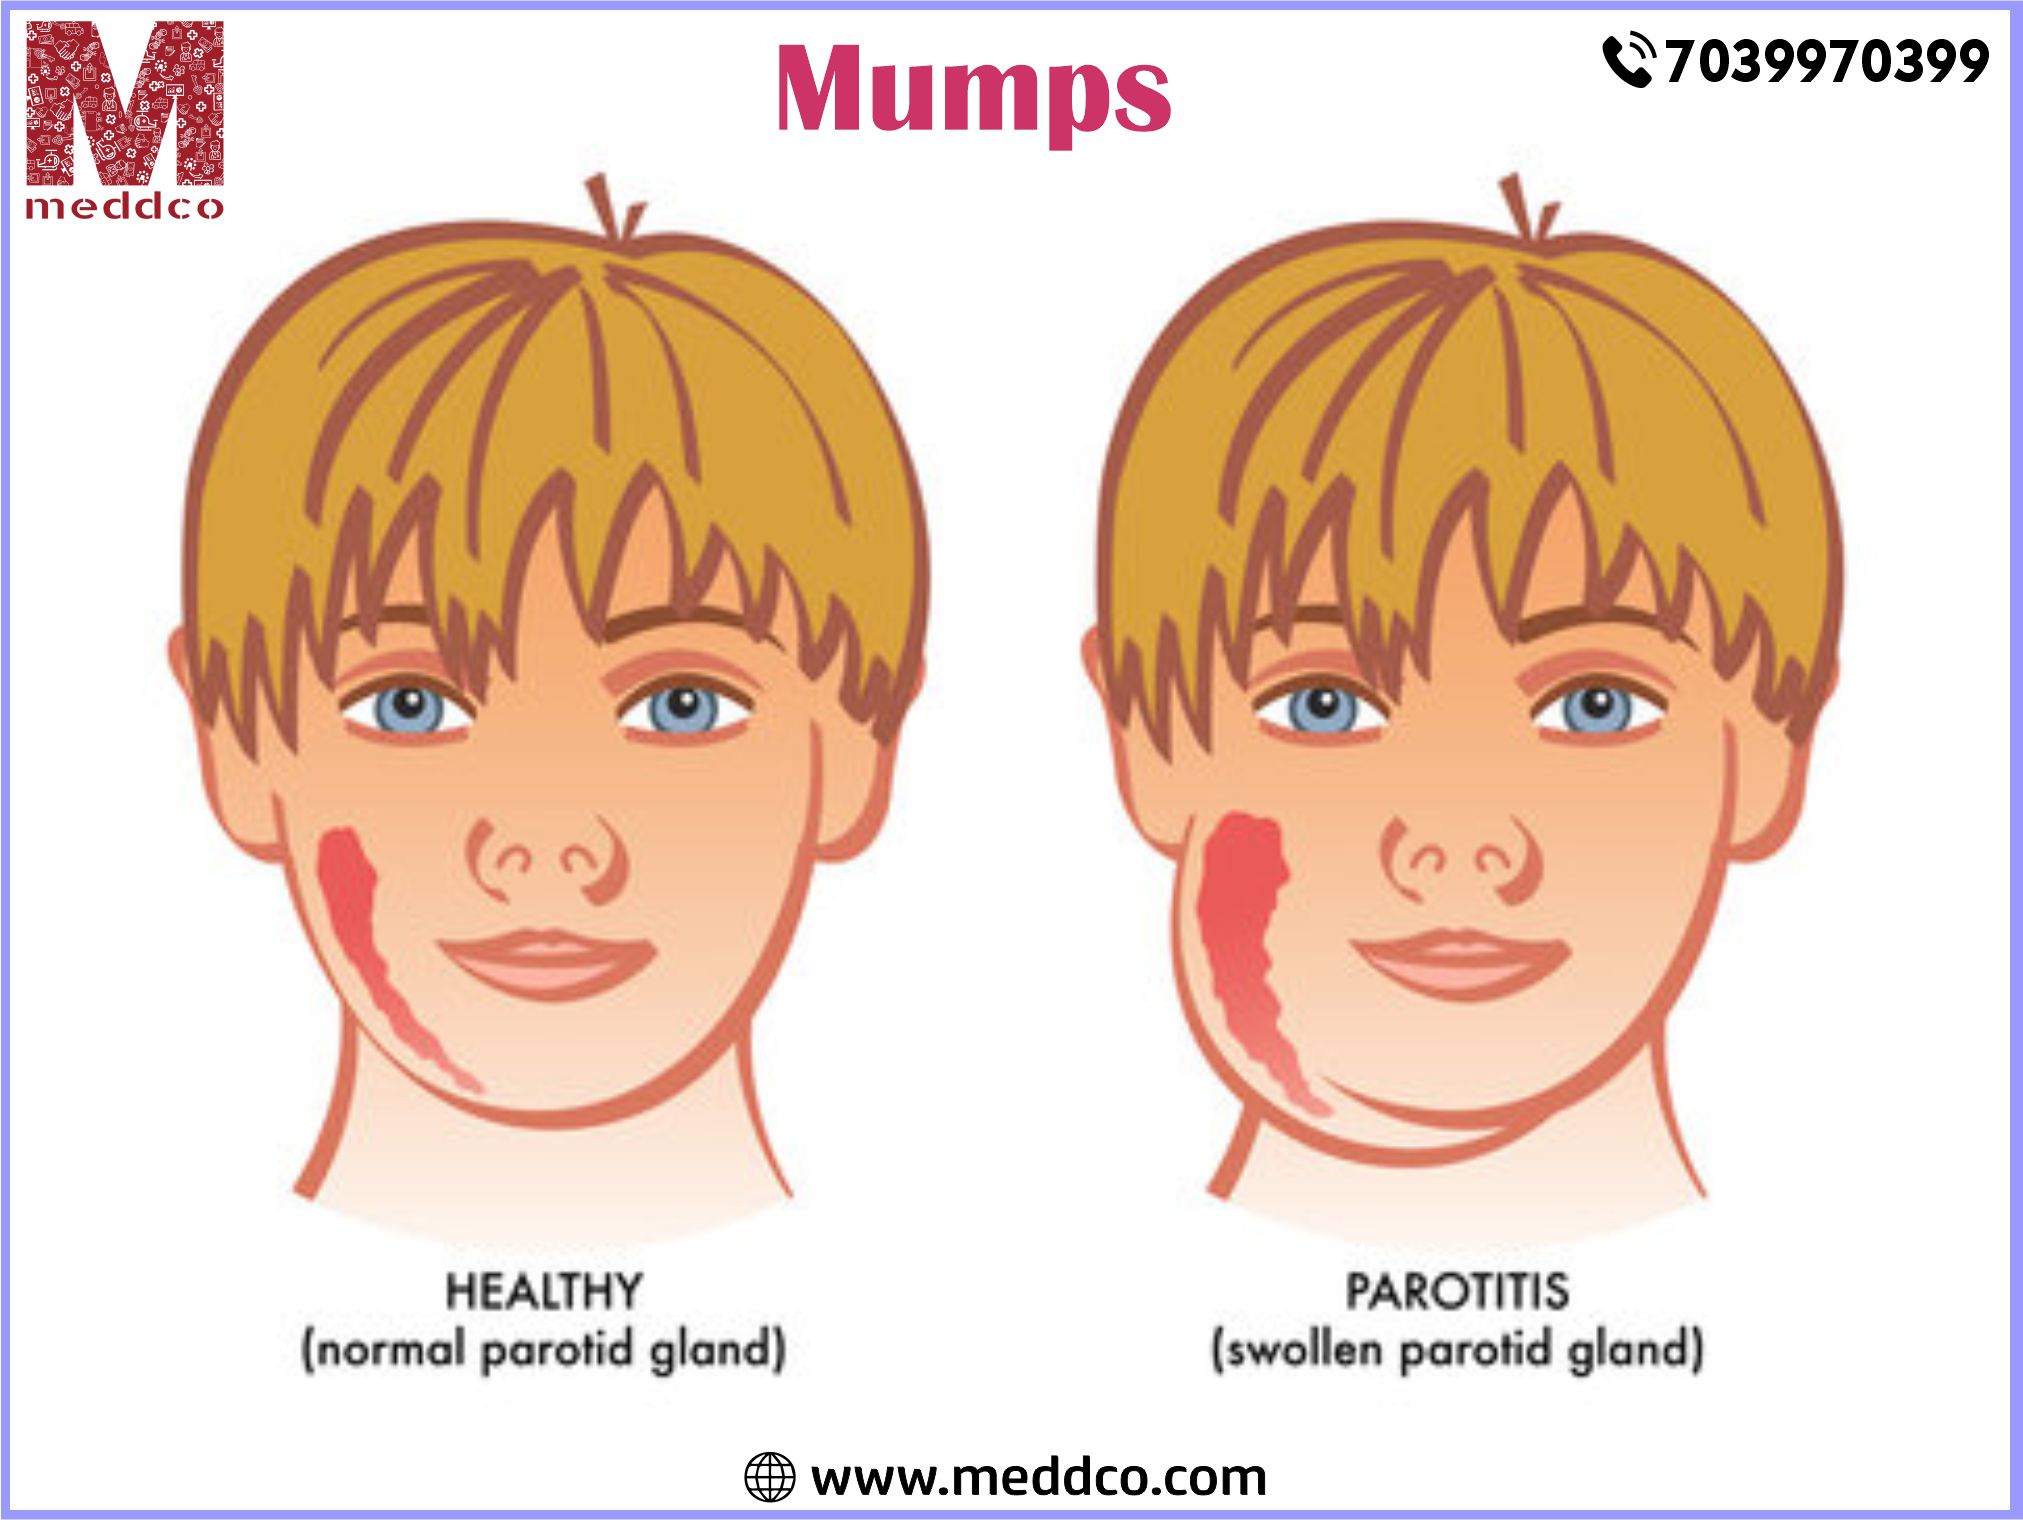 All the vital understanding about Mumps